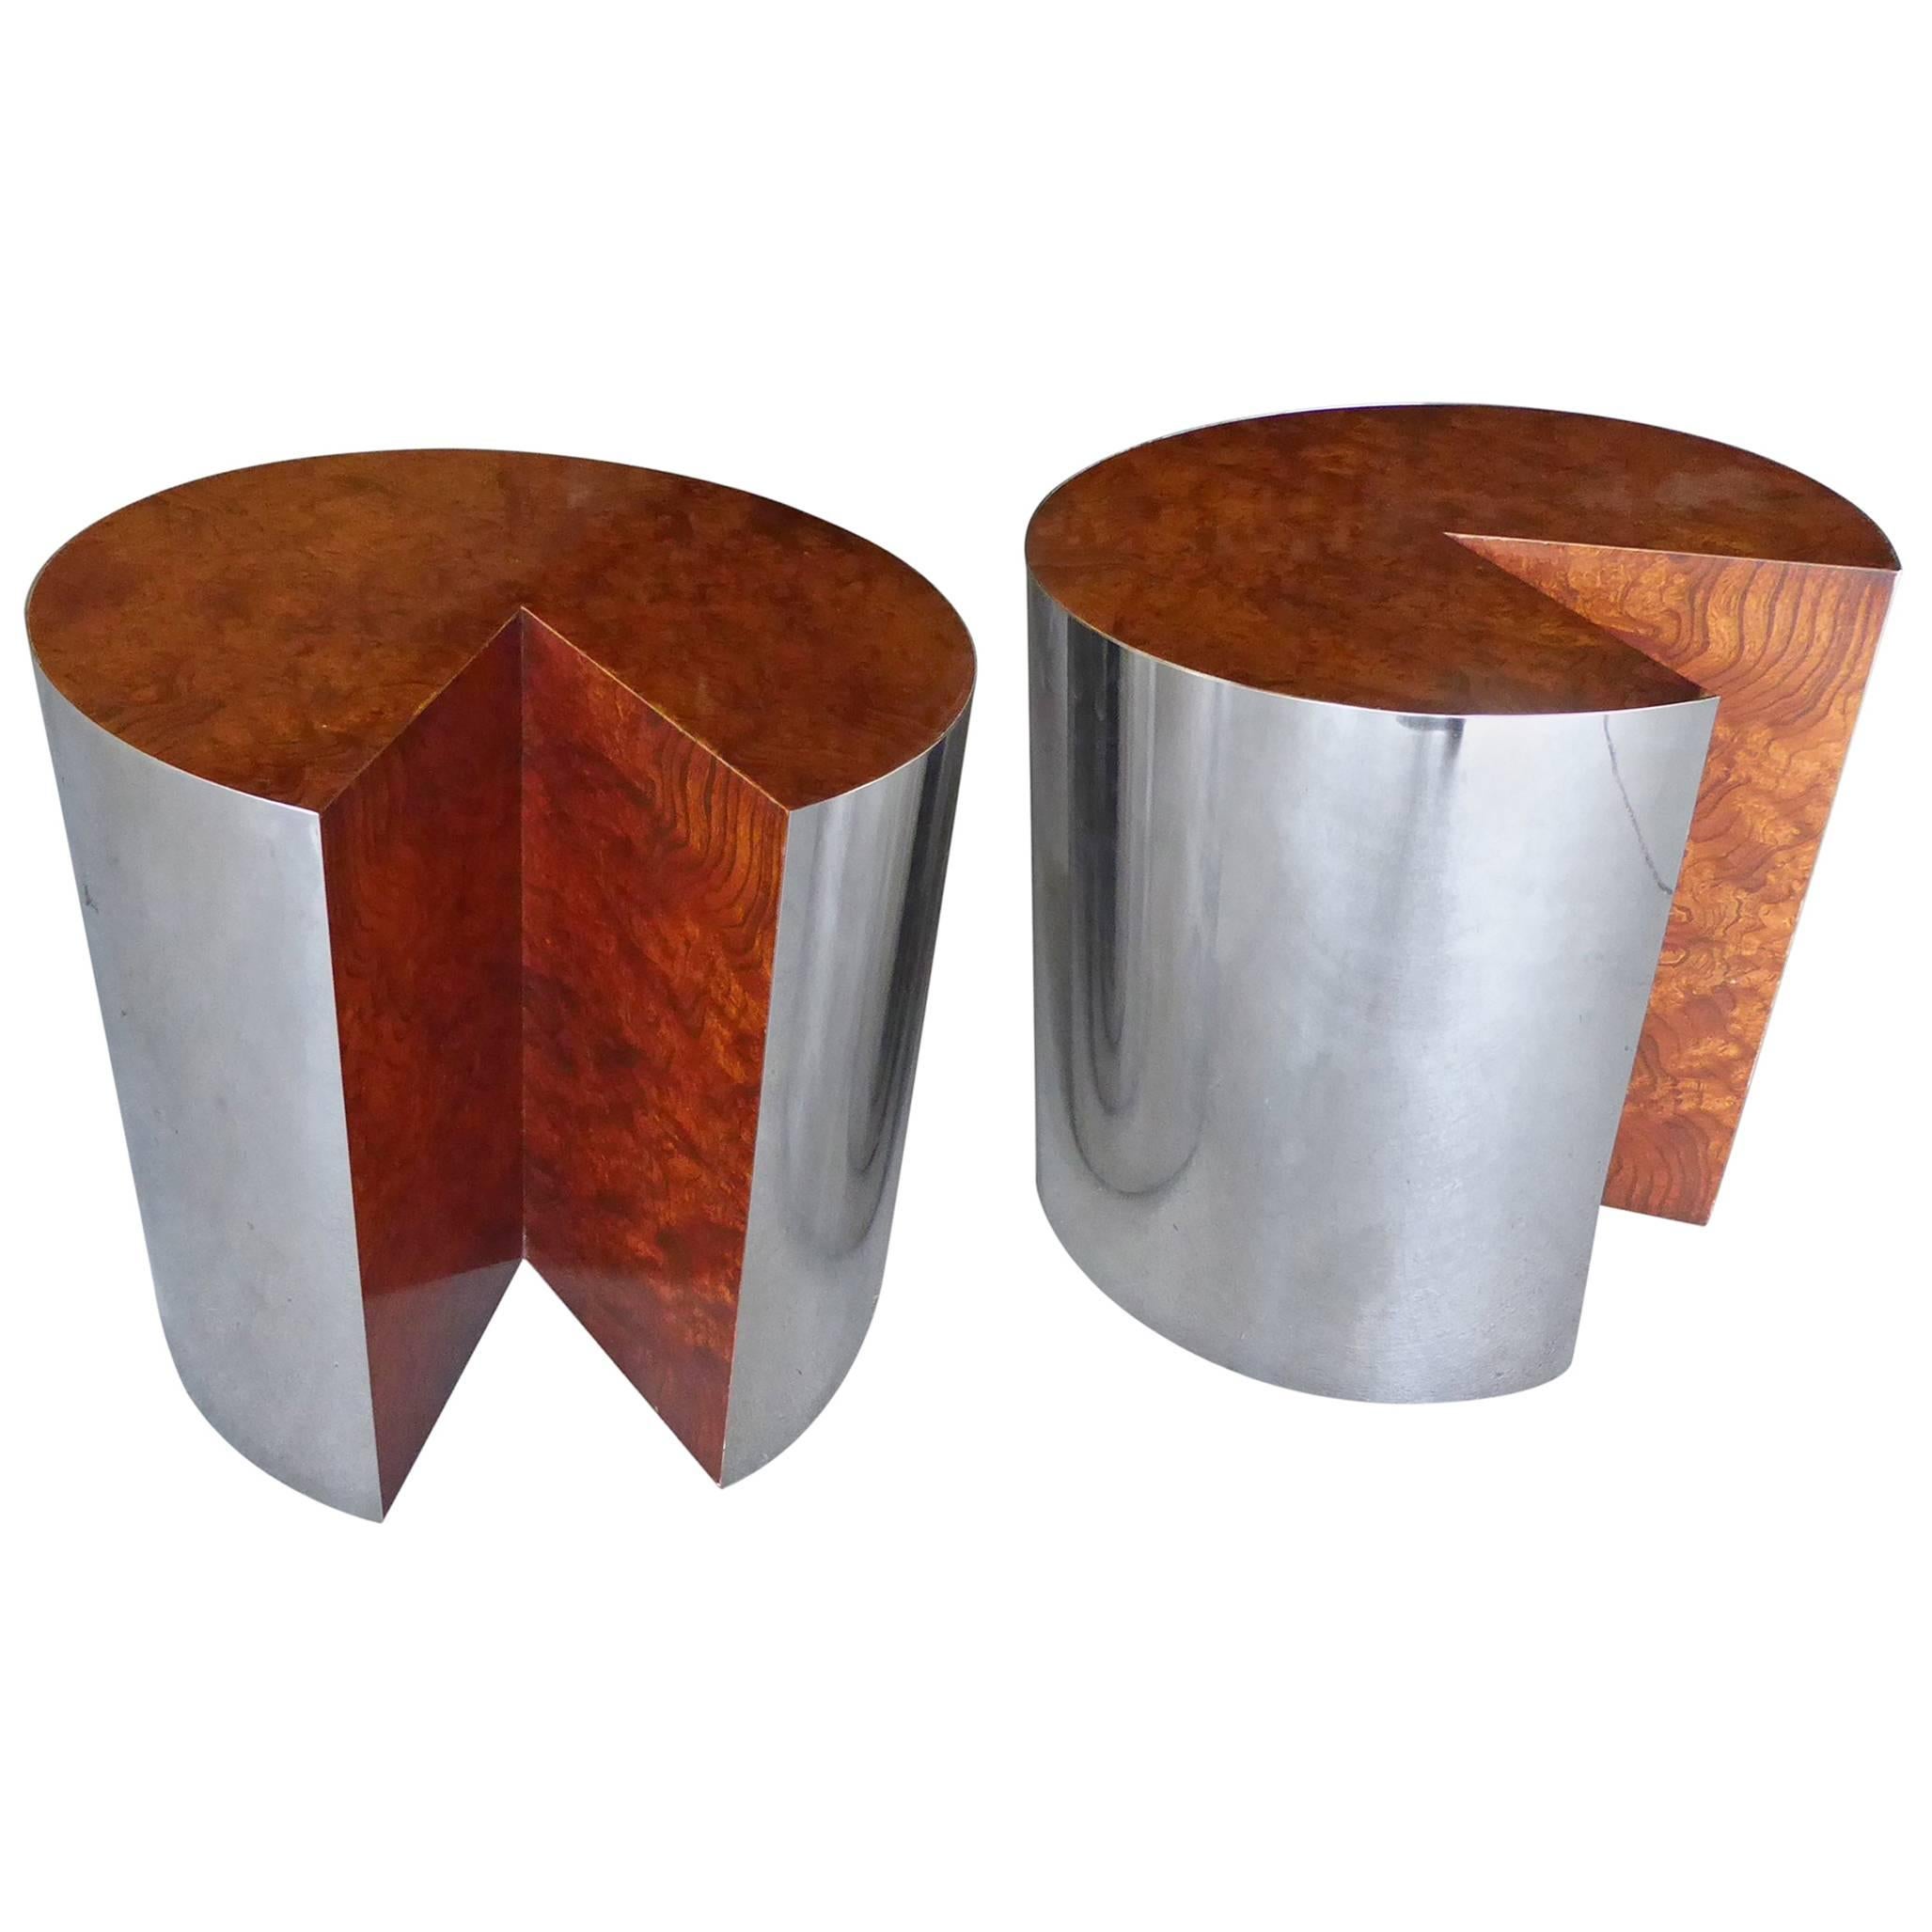 Pair of Burled Wood and Polished Steel Circular Side Tables by Pace Collection